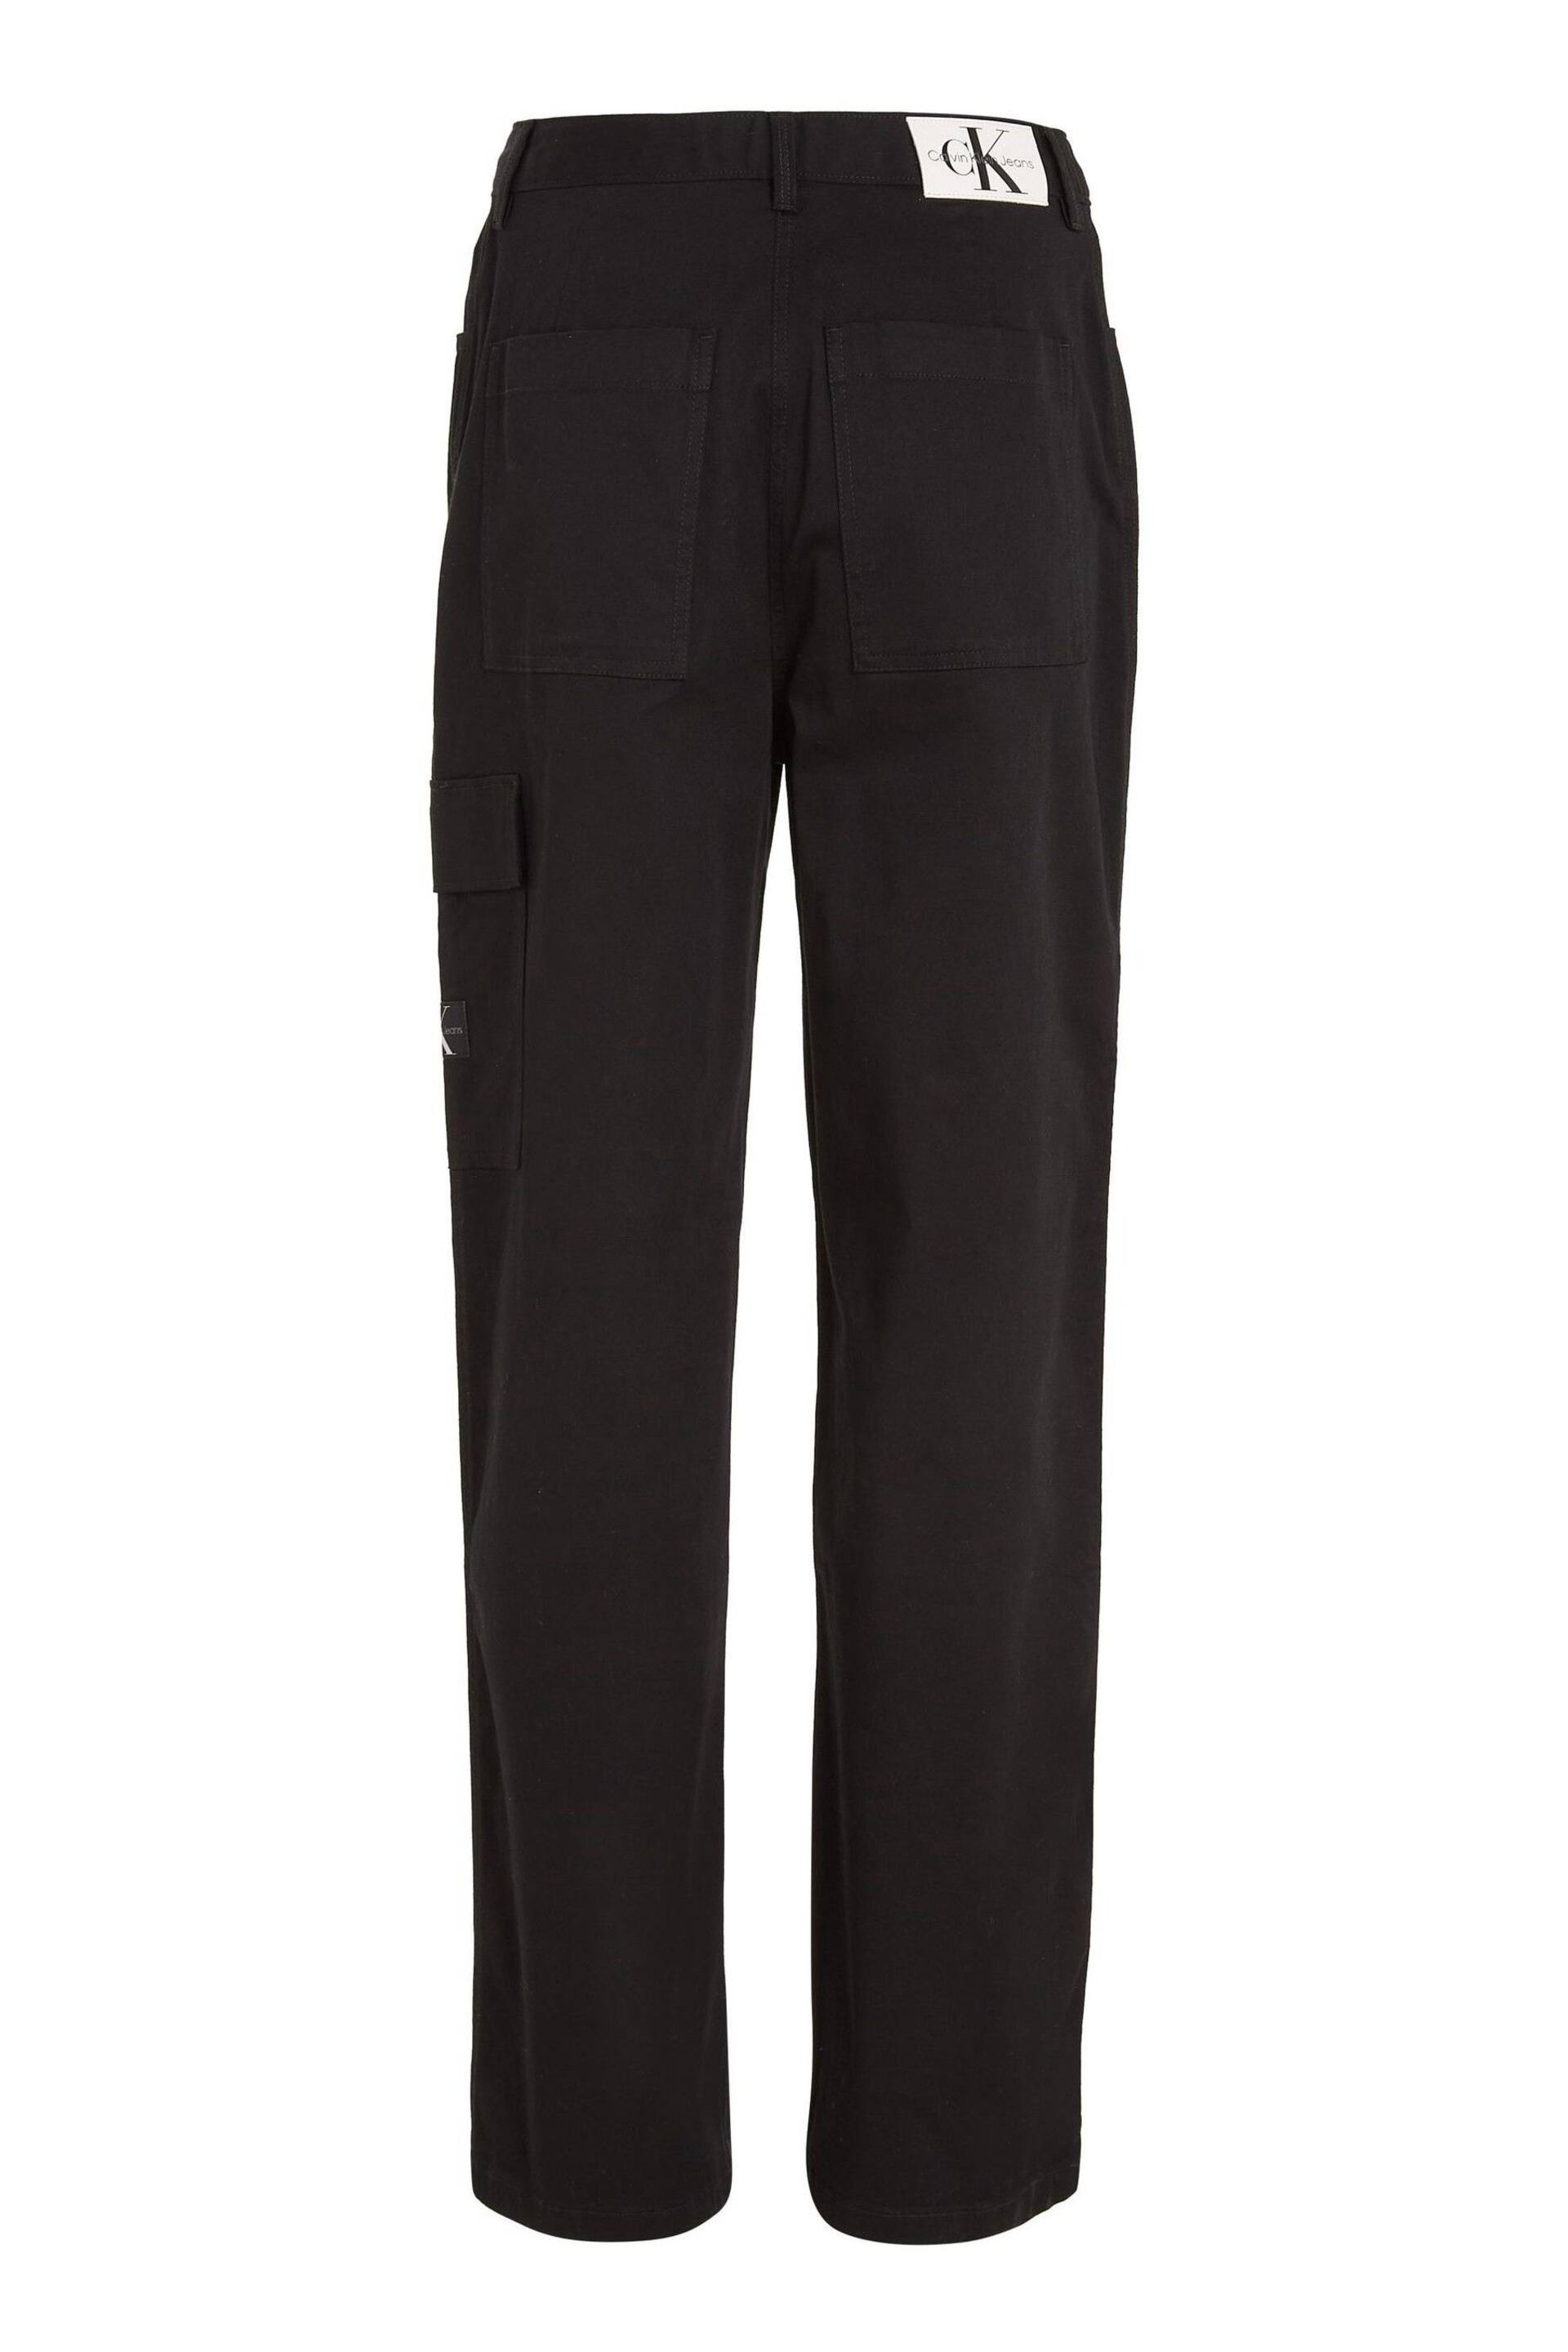 Calvin Klein Jeans High Rise Straight Twill Trousers - Image 5 of 6